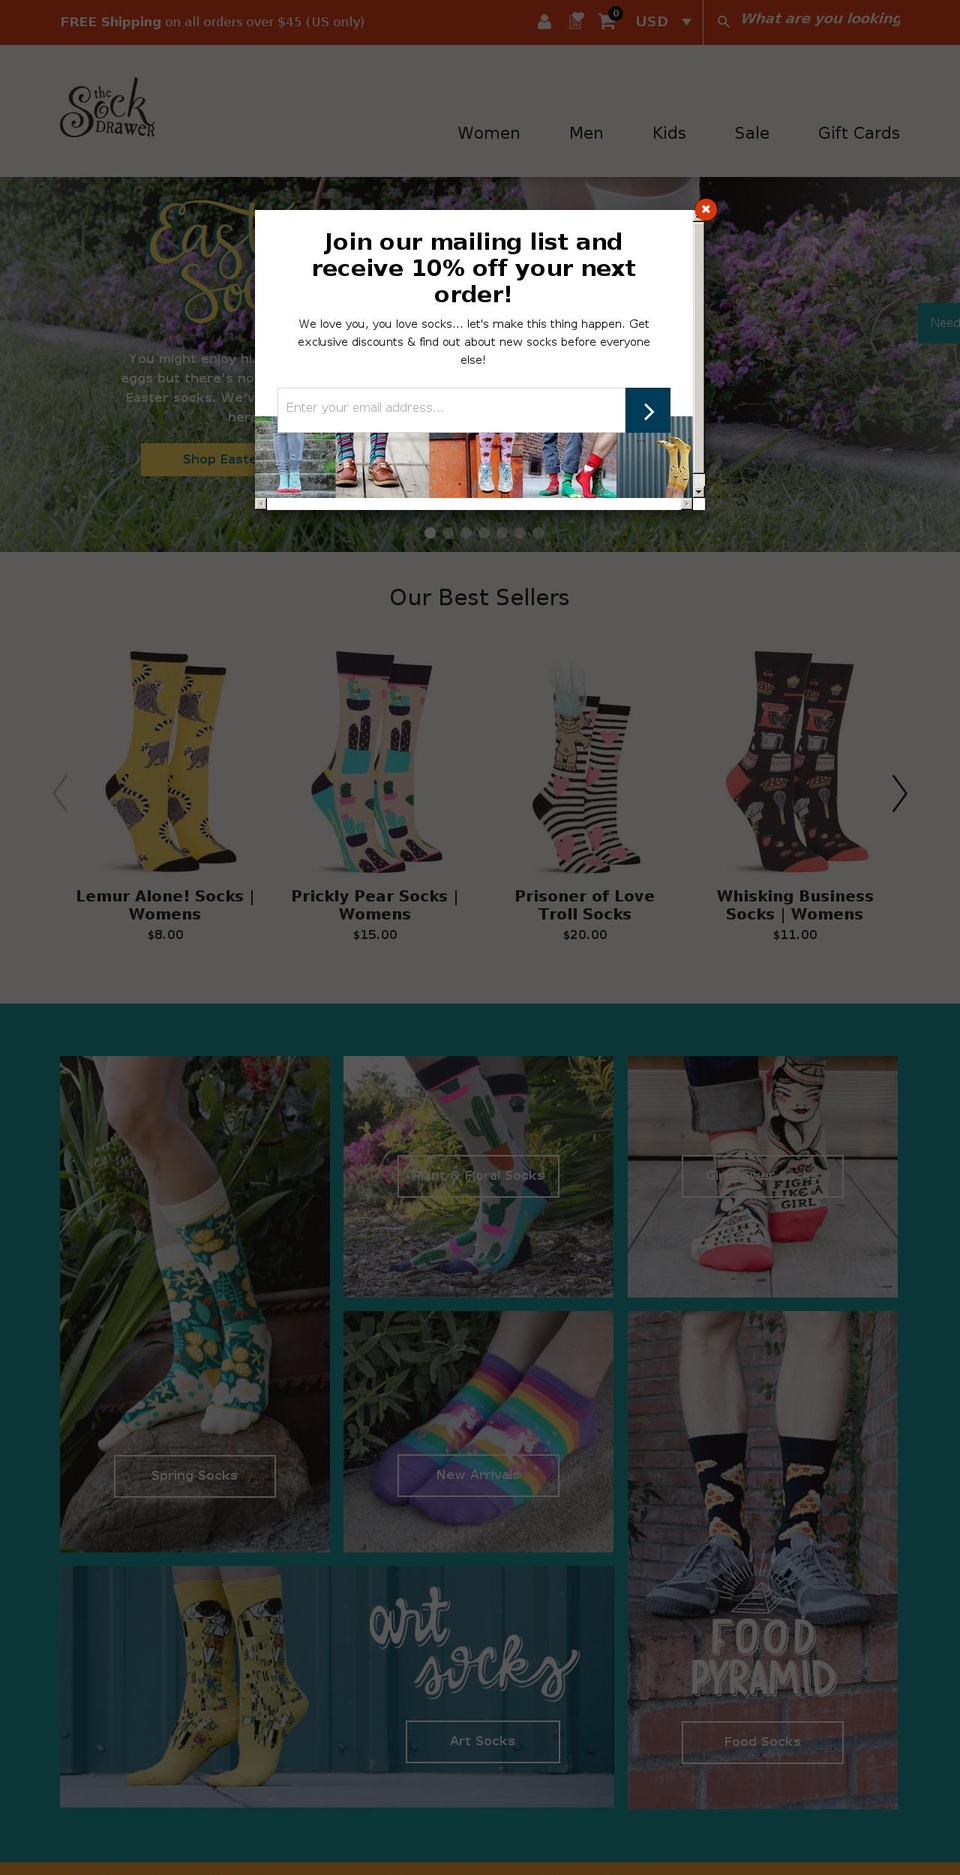 District Shopify theme site example sockdrawer.com